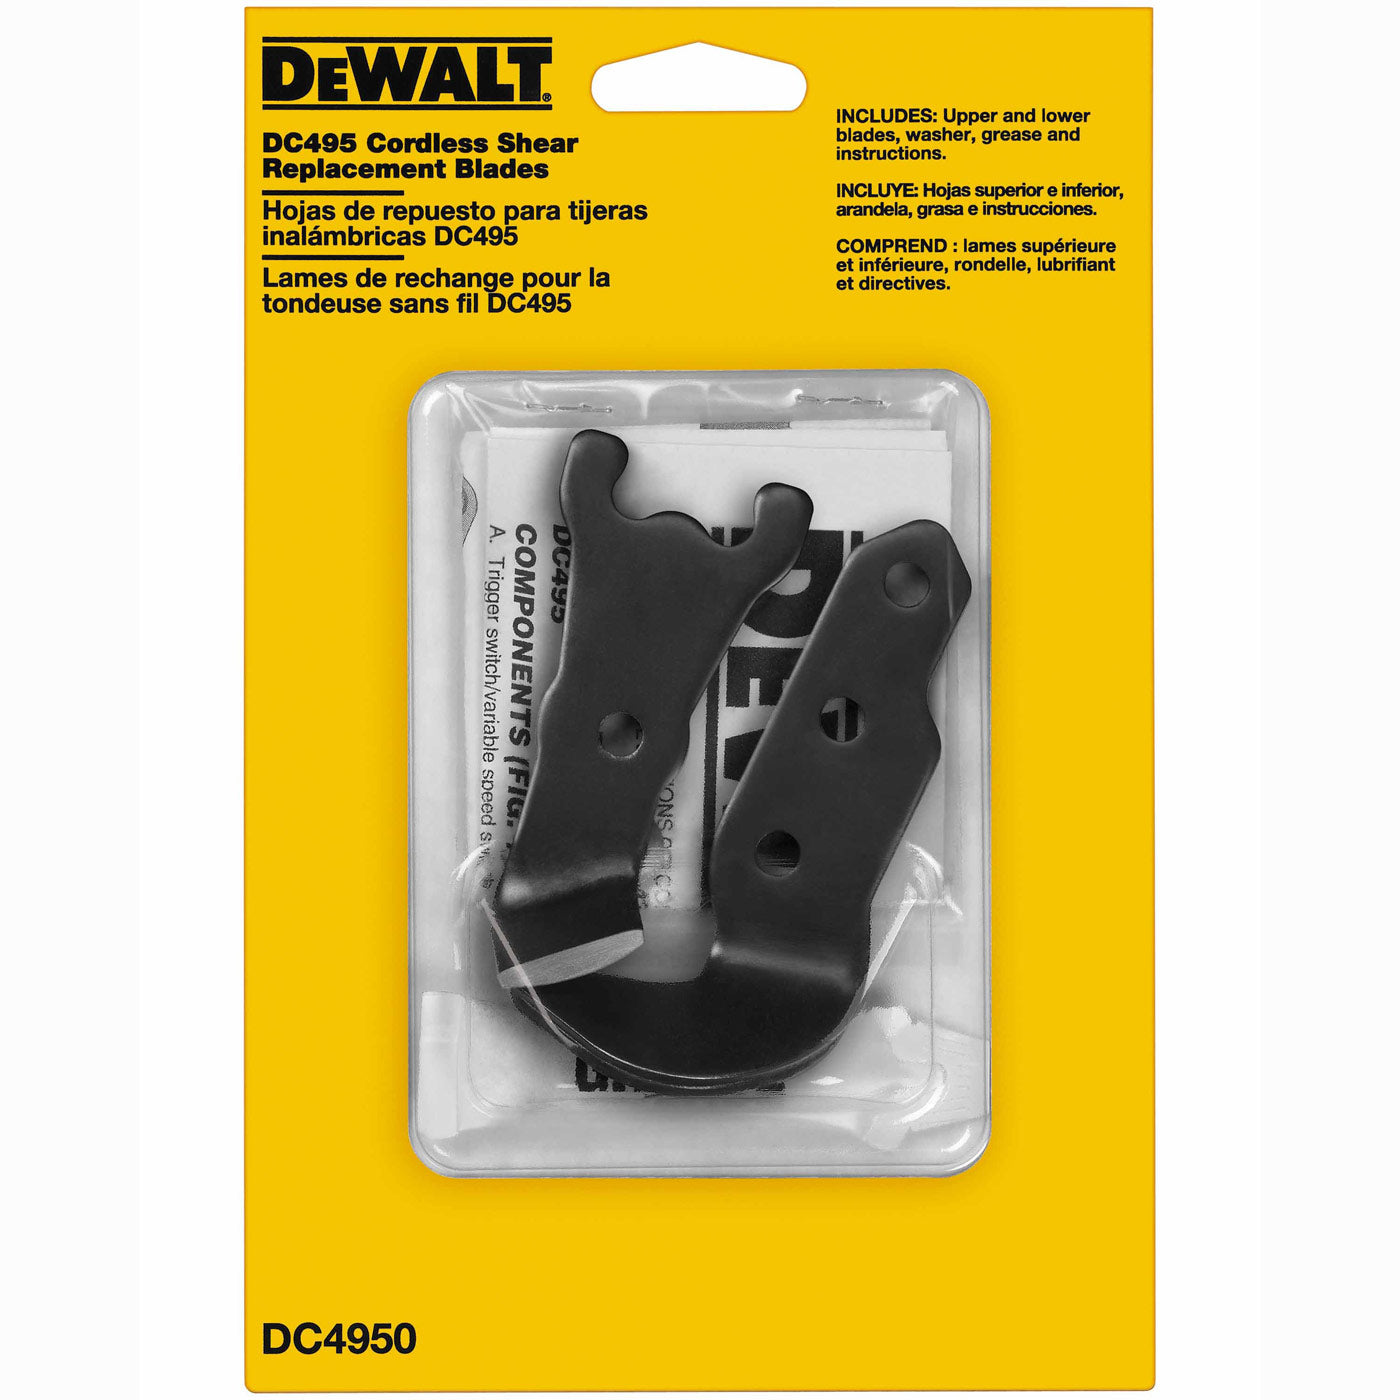 DeWalt DC4950 Replacement Blade Pack for DC495 Shear